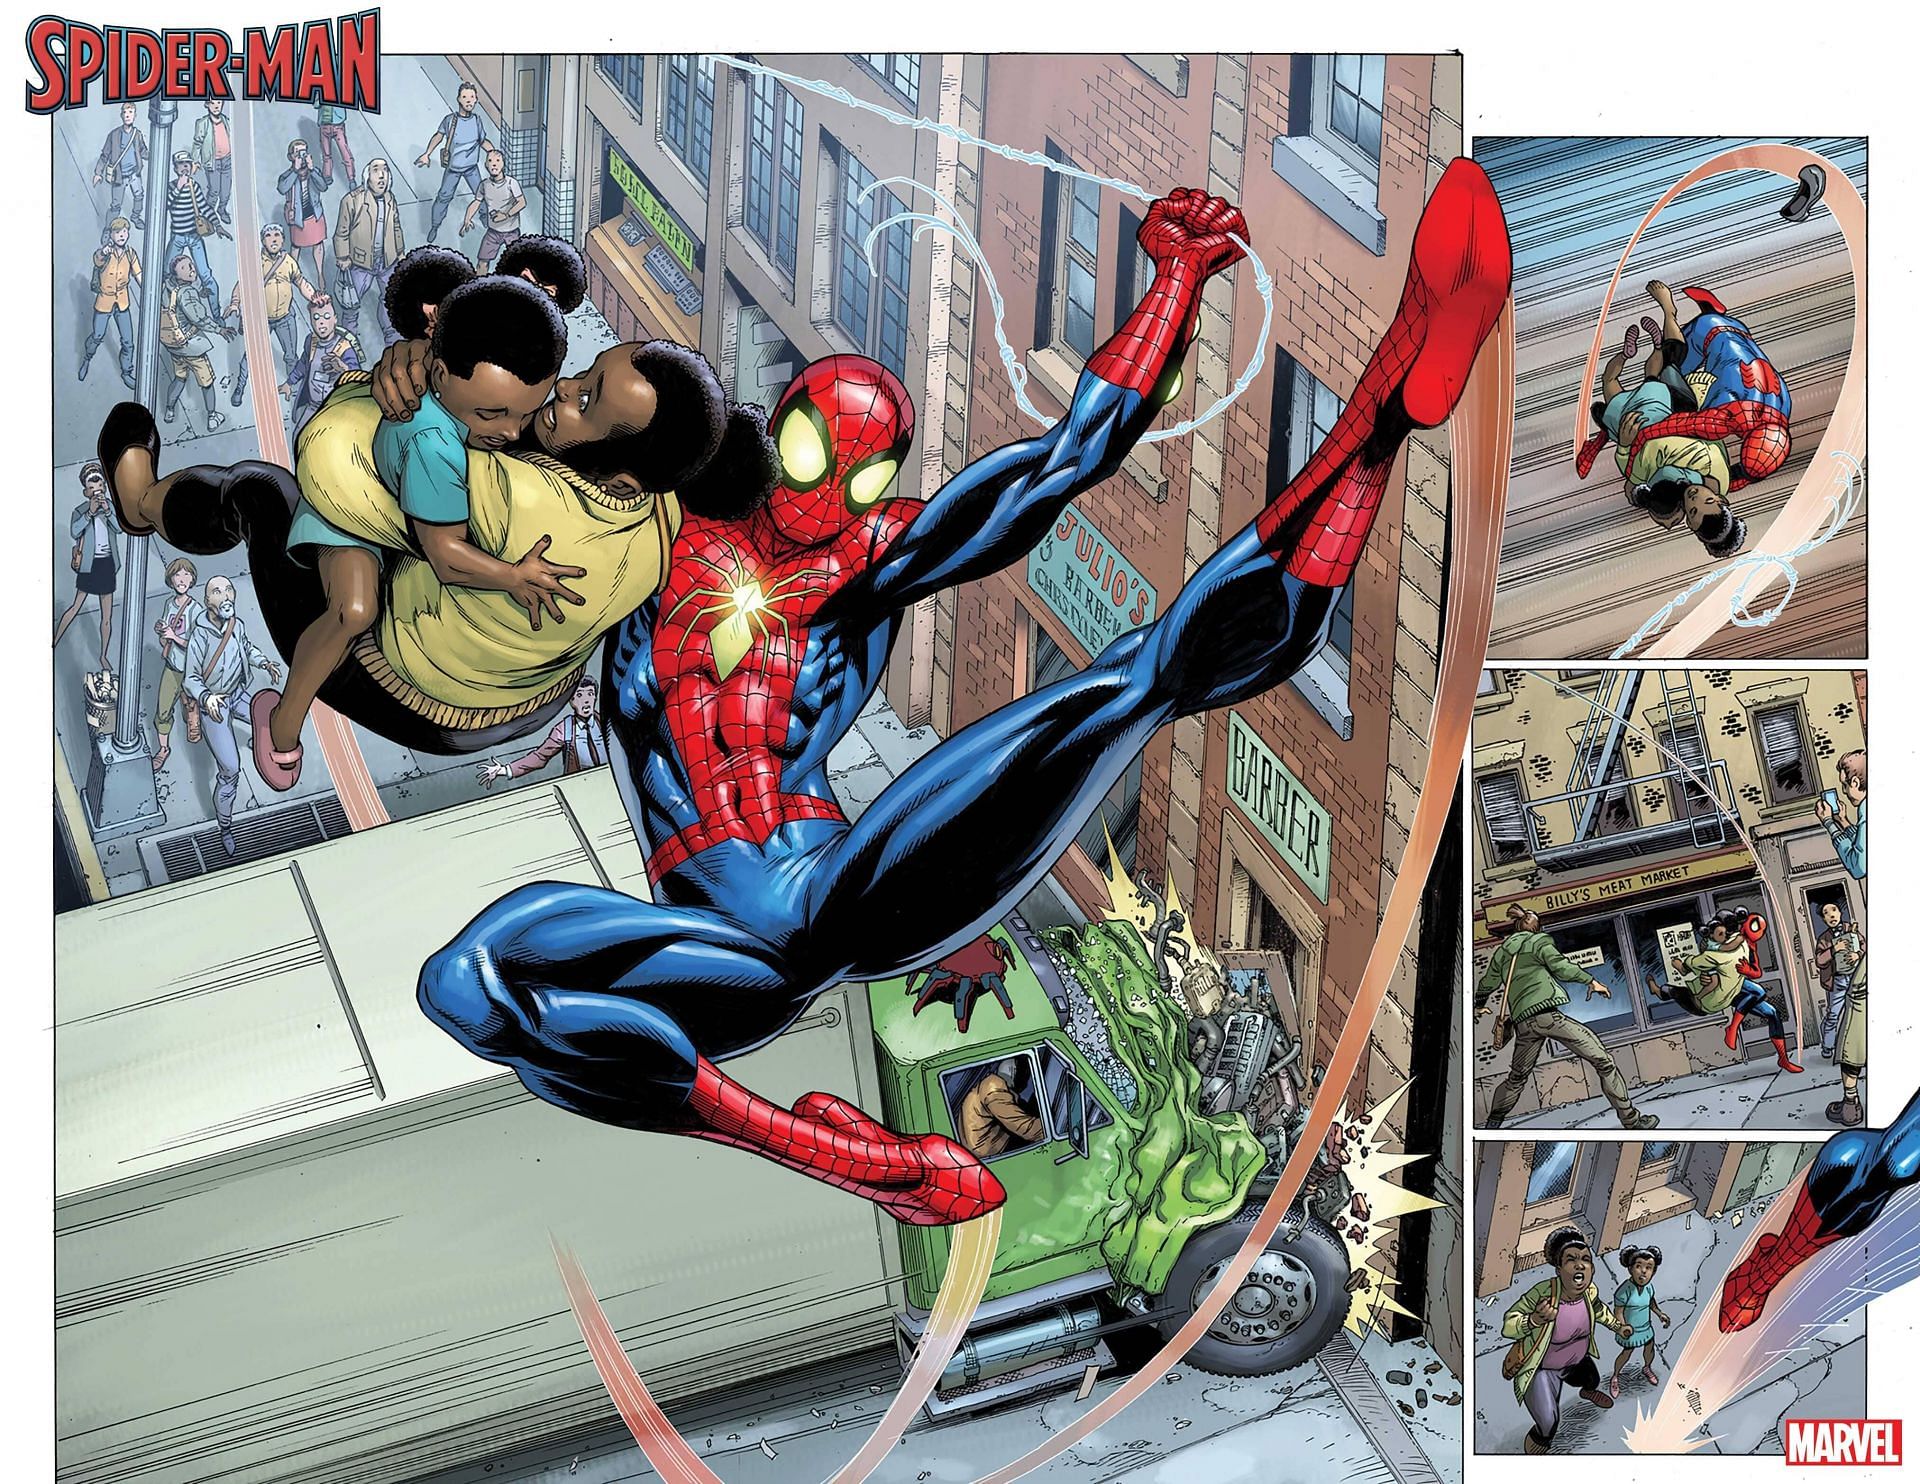 Is Marvel ending Spider-Verse in comics? Dan Slott and Mark Bagley bring  new Spider-Man series in October, affecting fate of multiverse